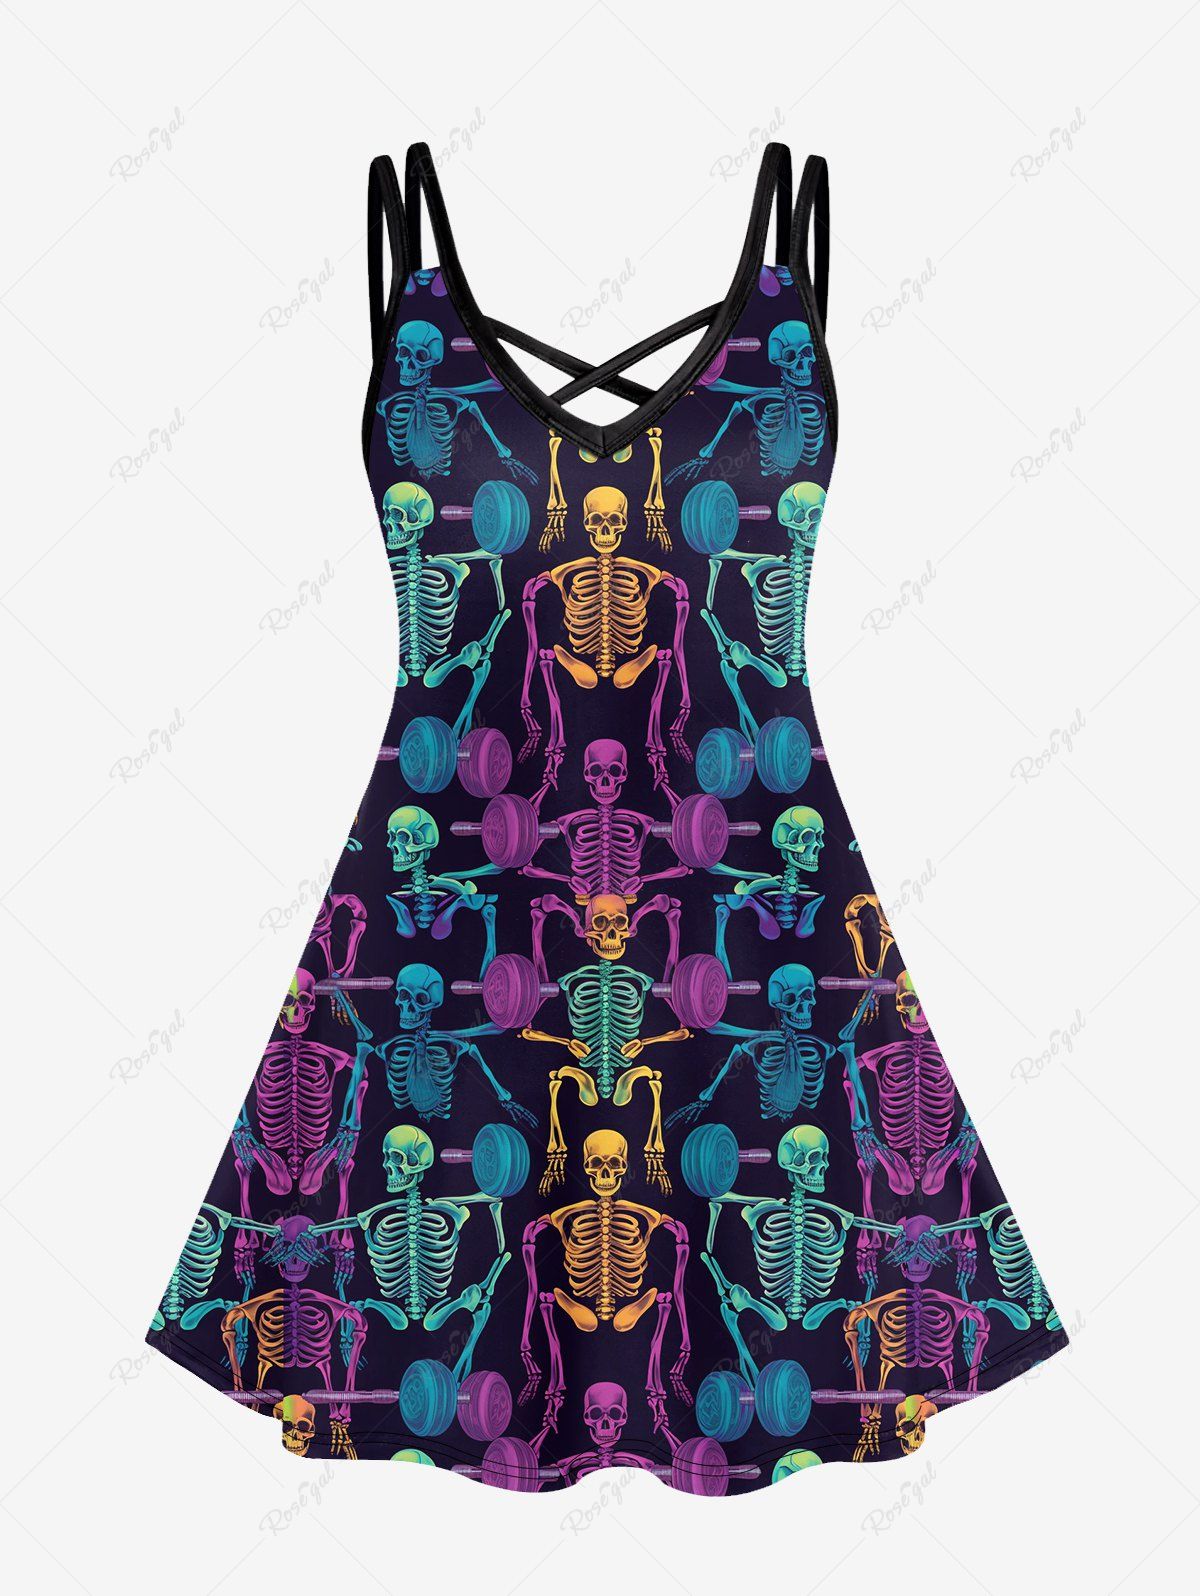 Trendy Gothic Skeleton Colorful Print Crisscross Strappy Cami Dress  